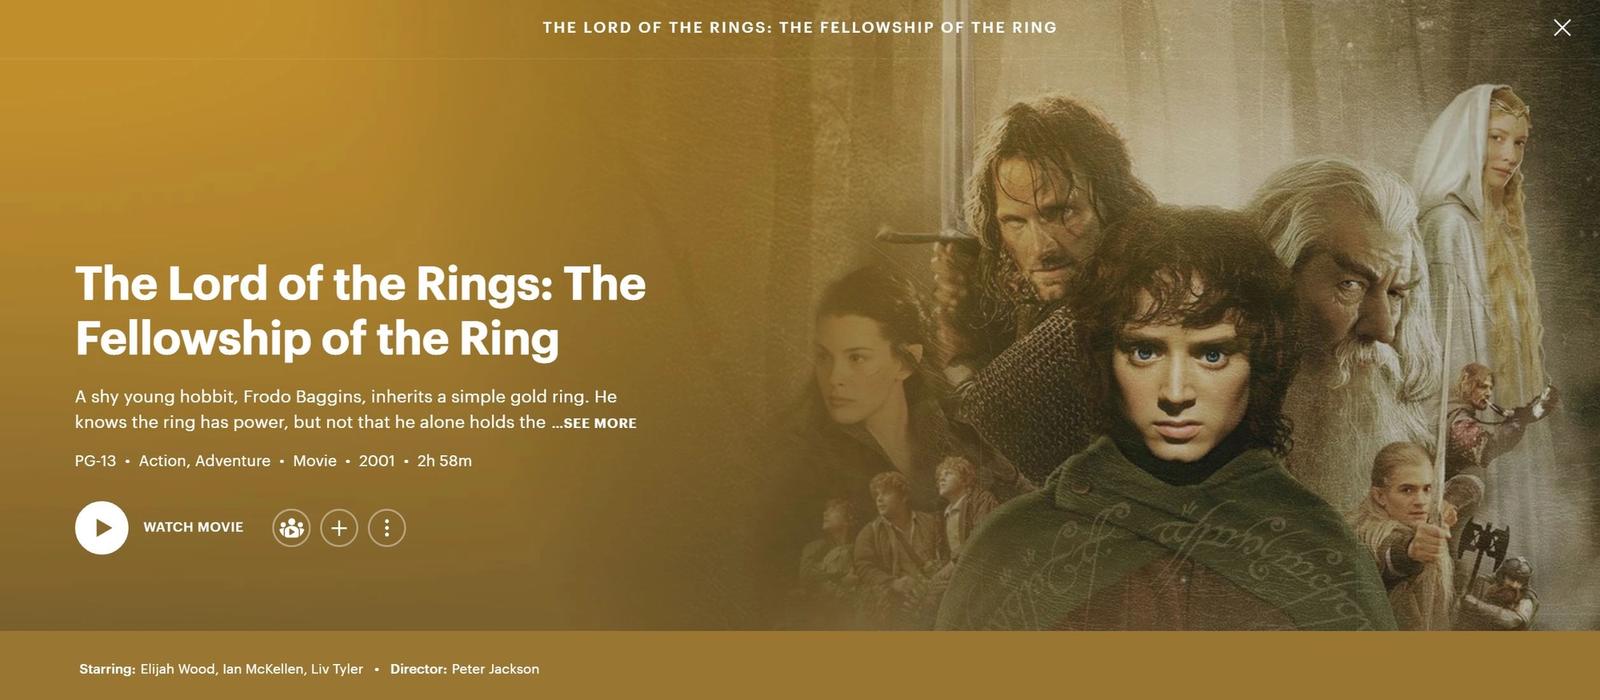 The Lord of the Rings streaming on hulu banner